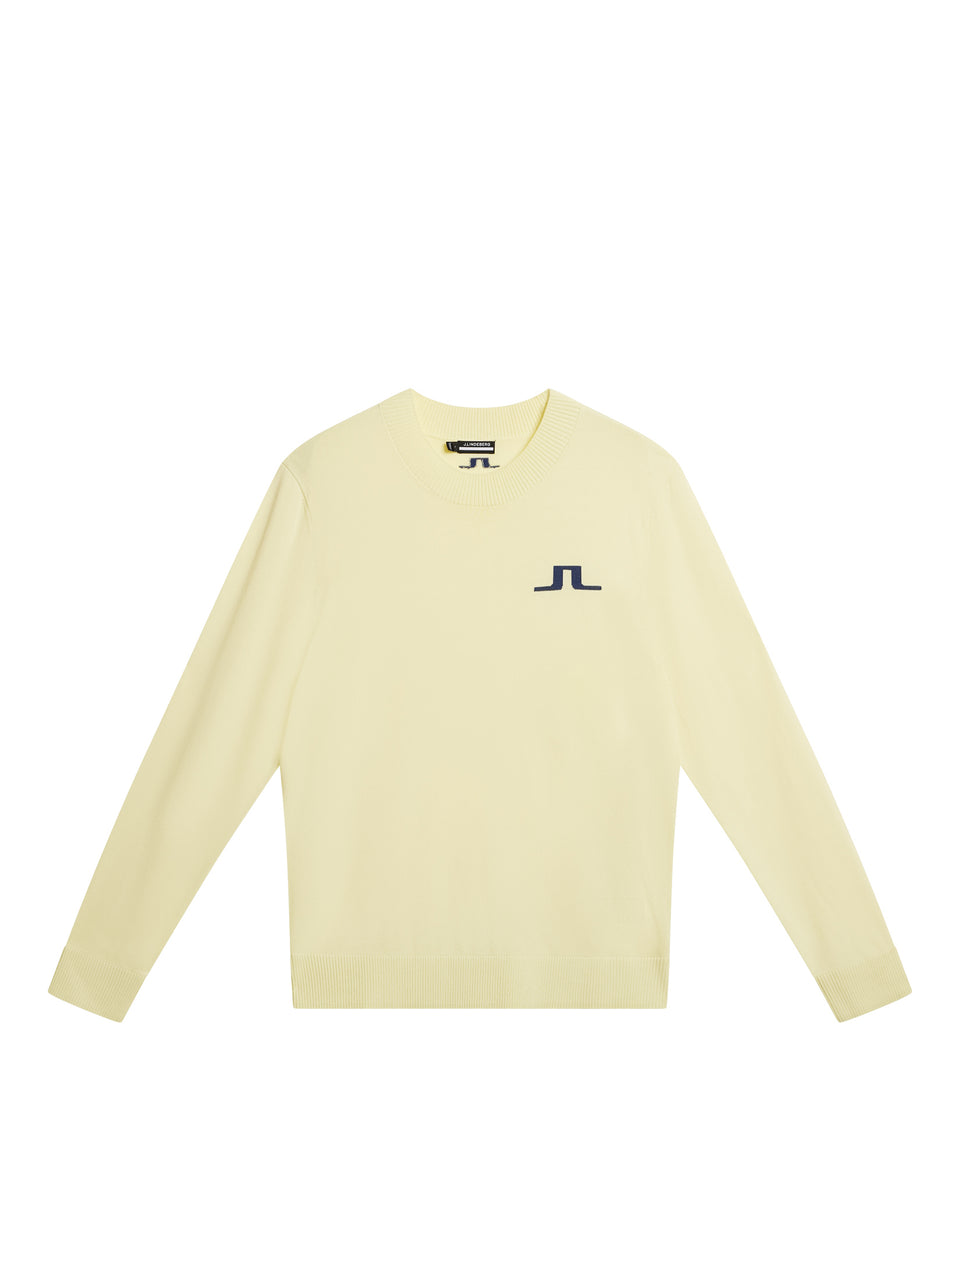 Gus Knitted Sweater / Wax Yellow